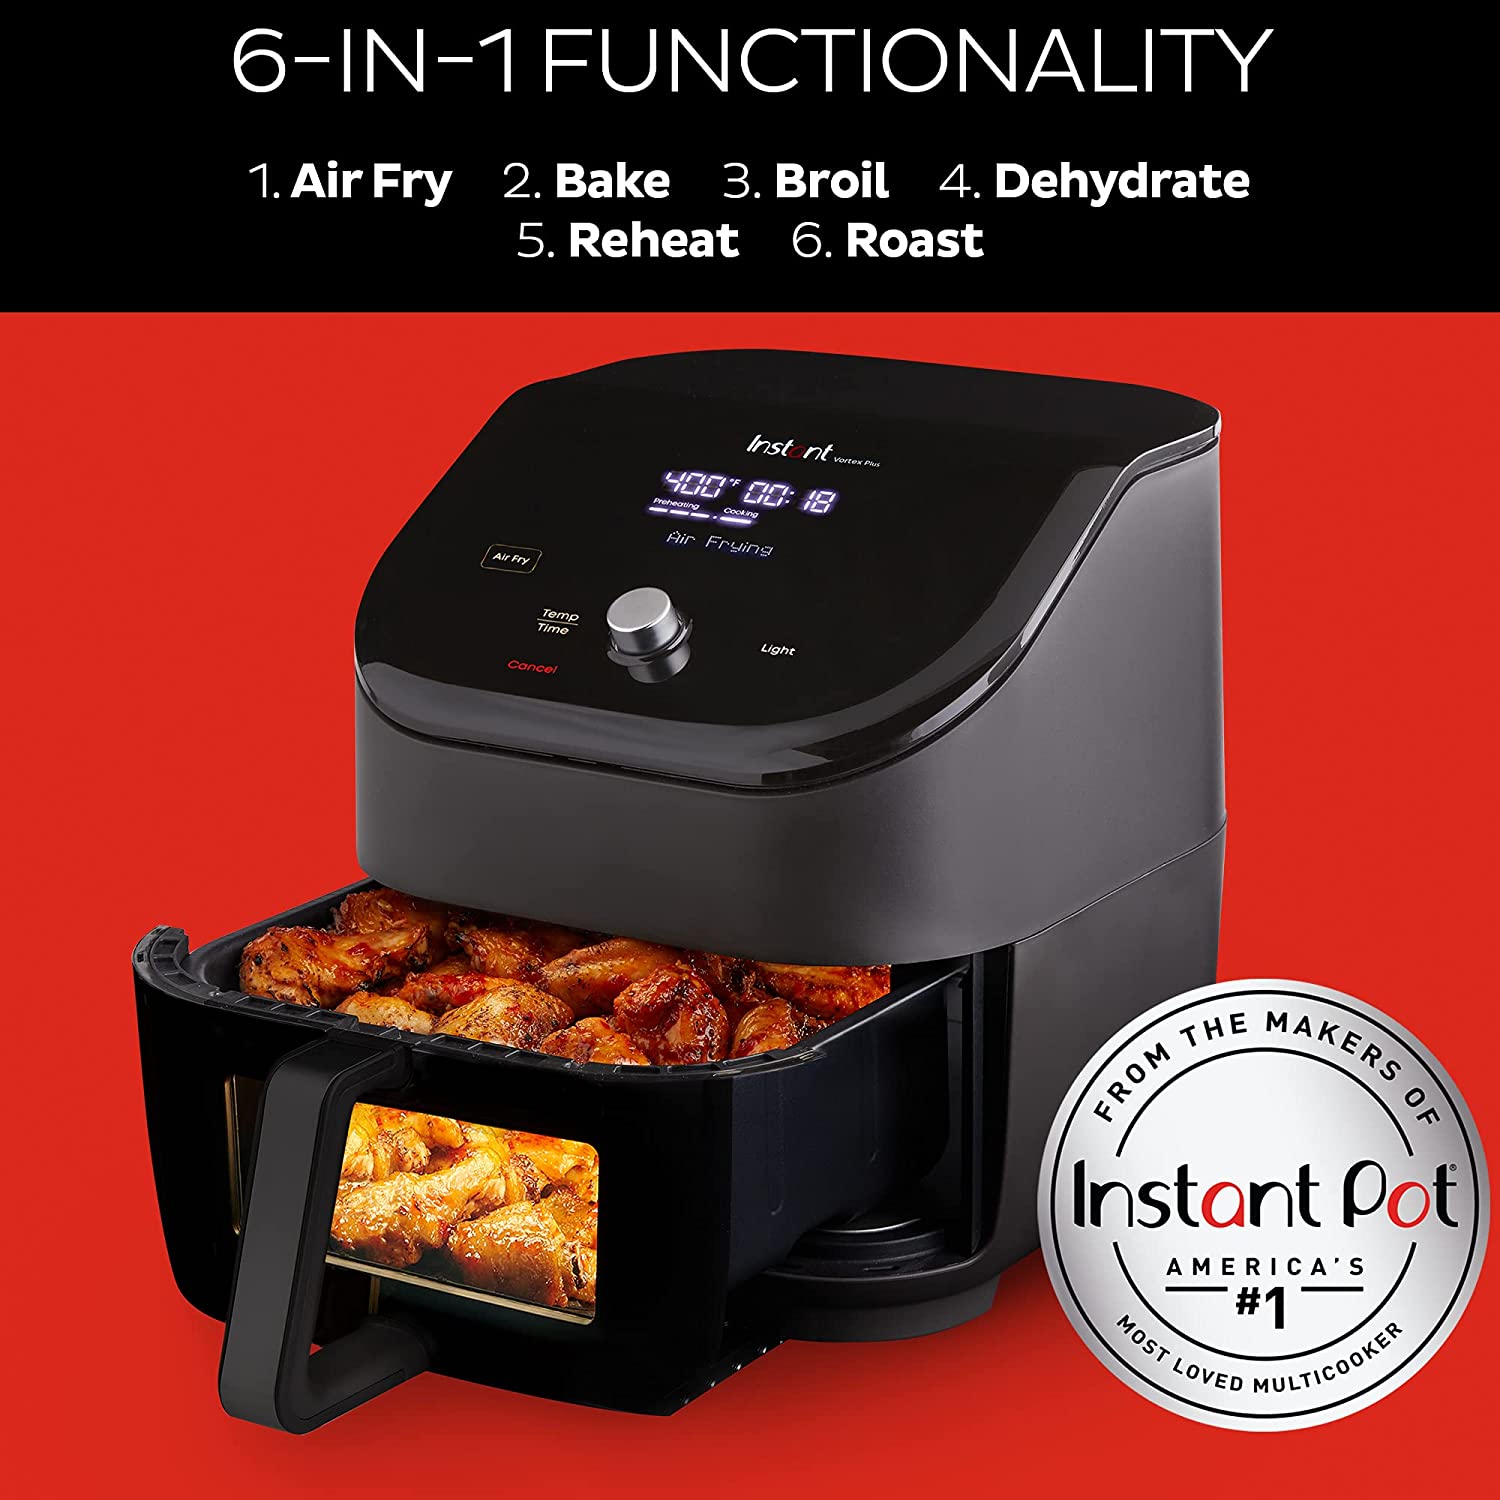 Instant Vortex Plus XL 8-quart Dual Basket Air Fryer Oven, From that Makers of Instant Pot, 2 Independent Frying Baskets, ClearCook Windows, Dishwasher-Safe Baskets, App with over 100 Recipes